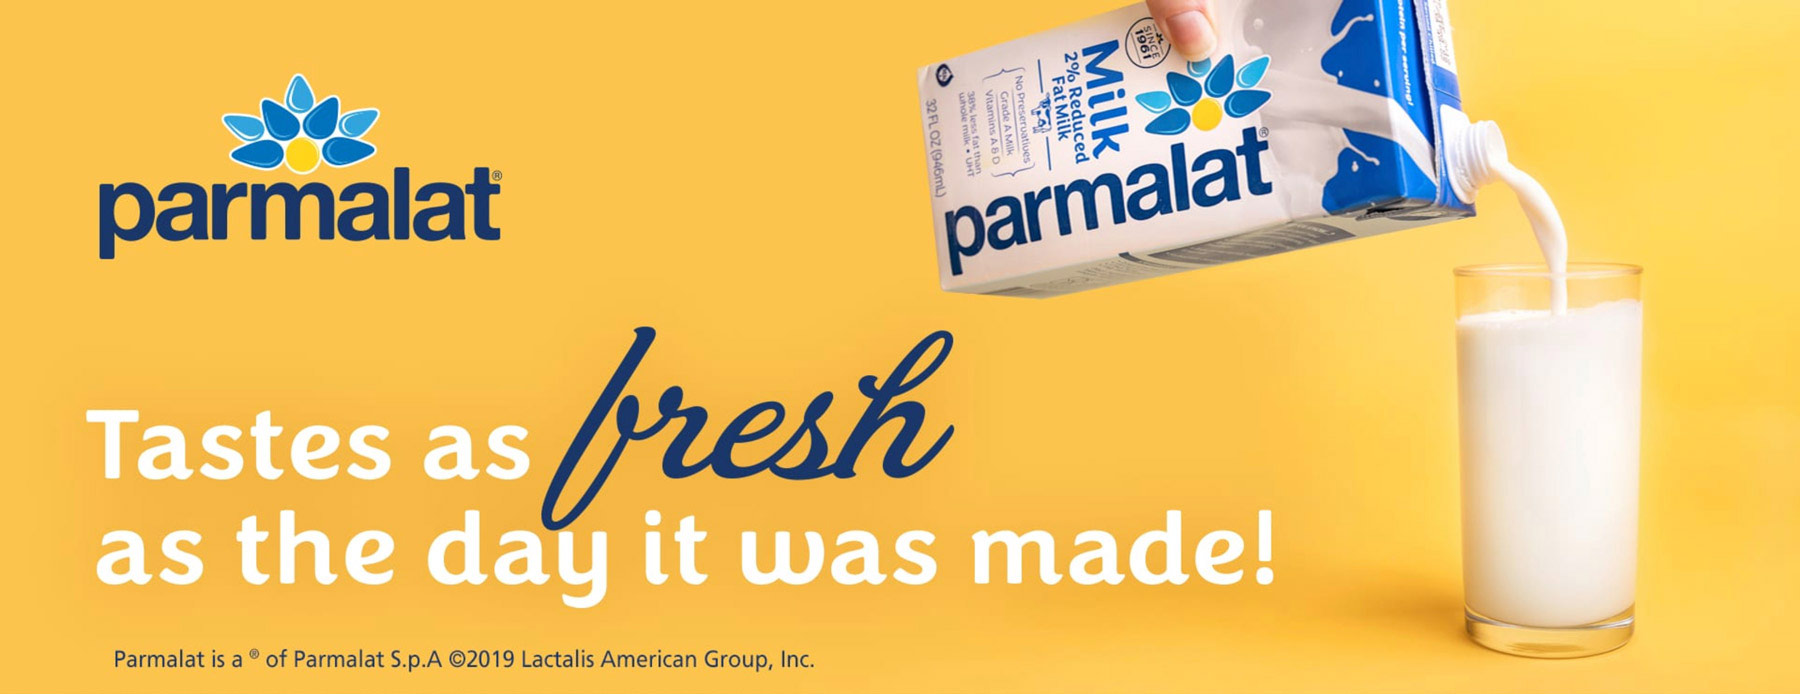 Parmalat milk advertisement featuring pouring of milk from carton to glass